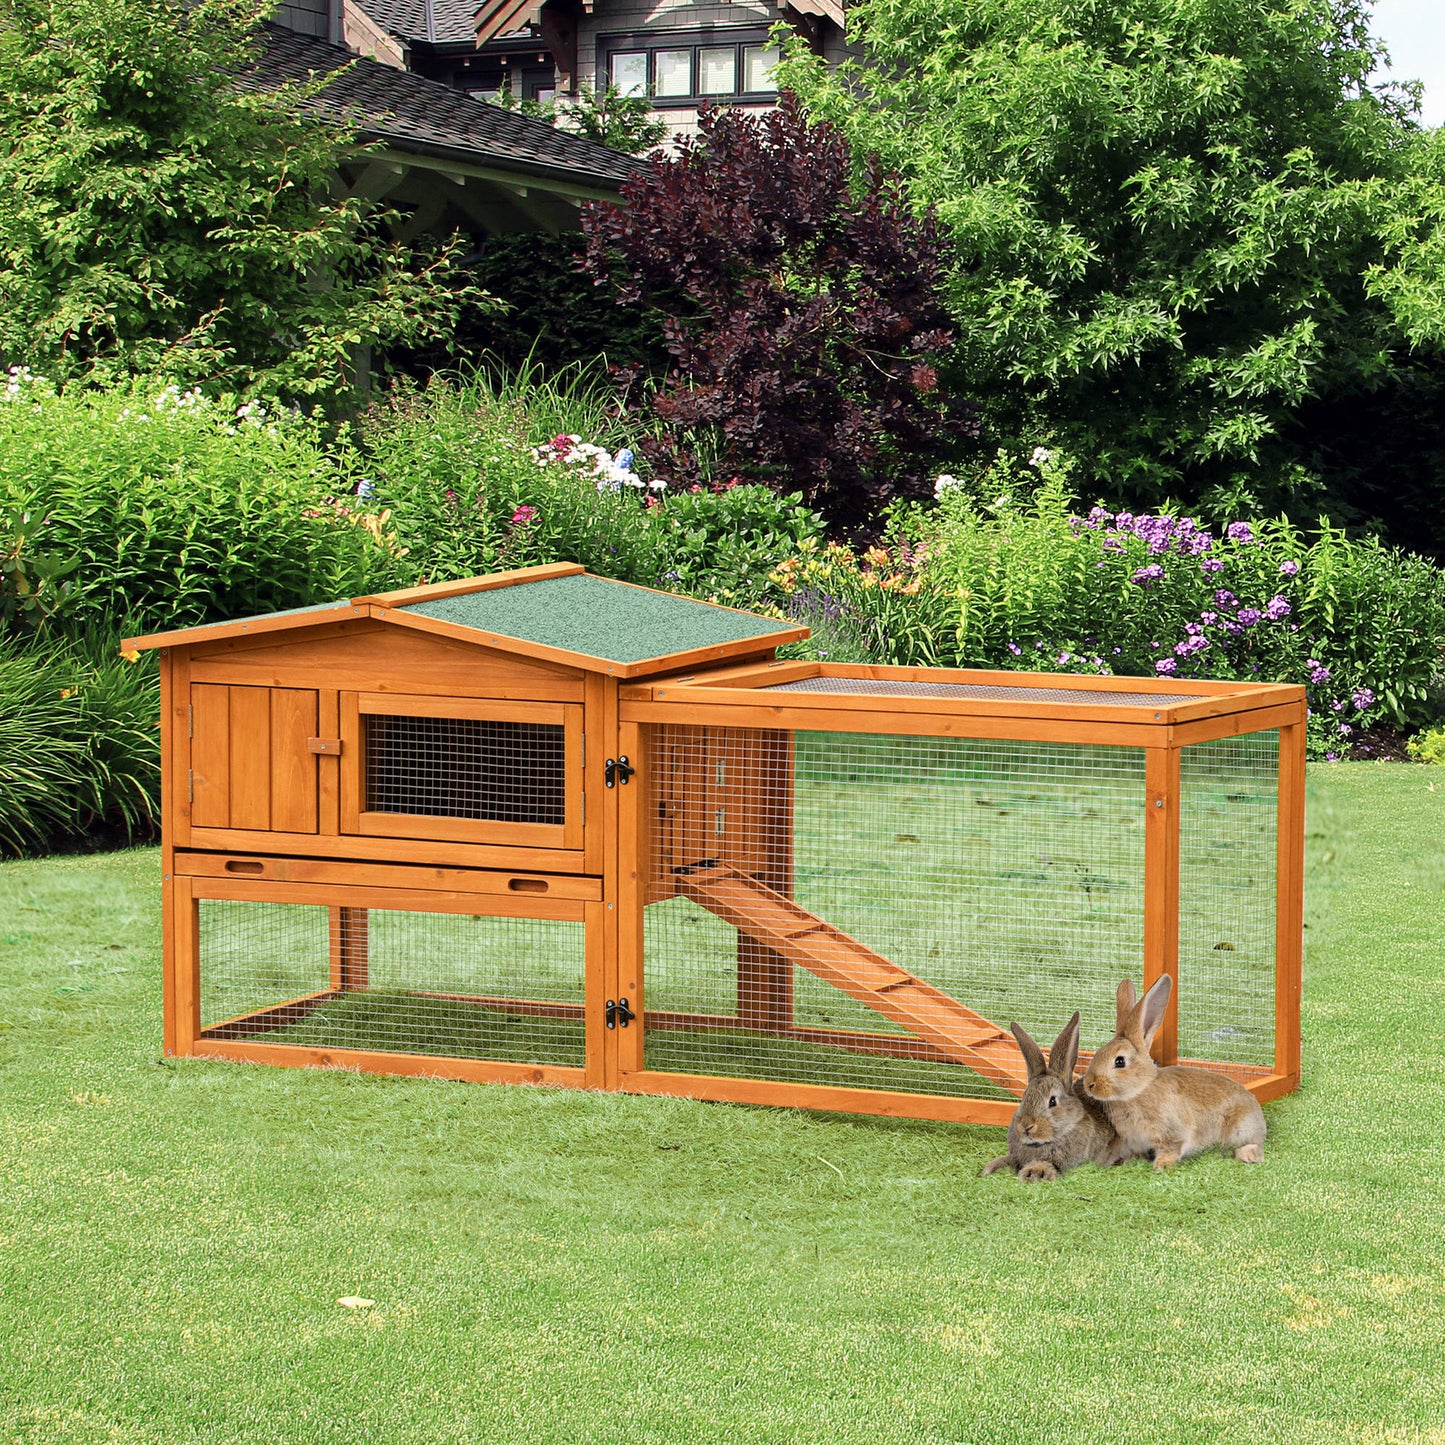 PawHut Rabbit Hutch and Run Outdoor Bunny Cage Wooden Guinea Pig Hide House with Sliding Tray, Hay Rack, Ramp, 156 x 58 x 68cm